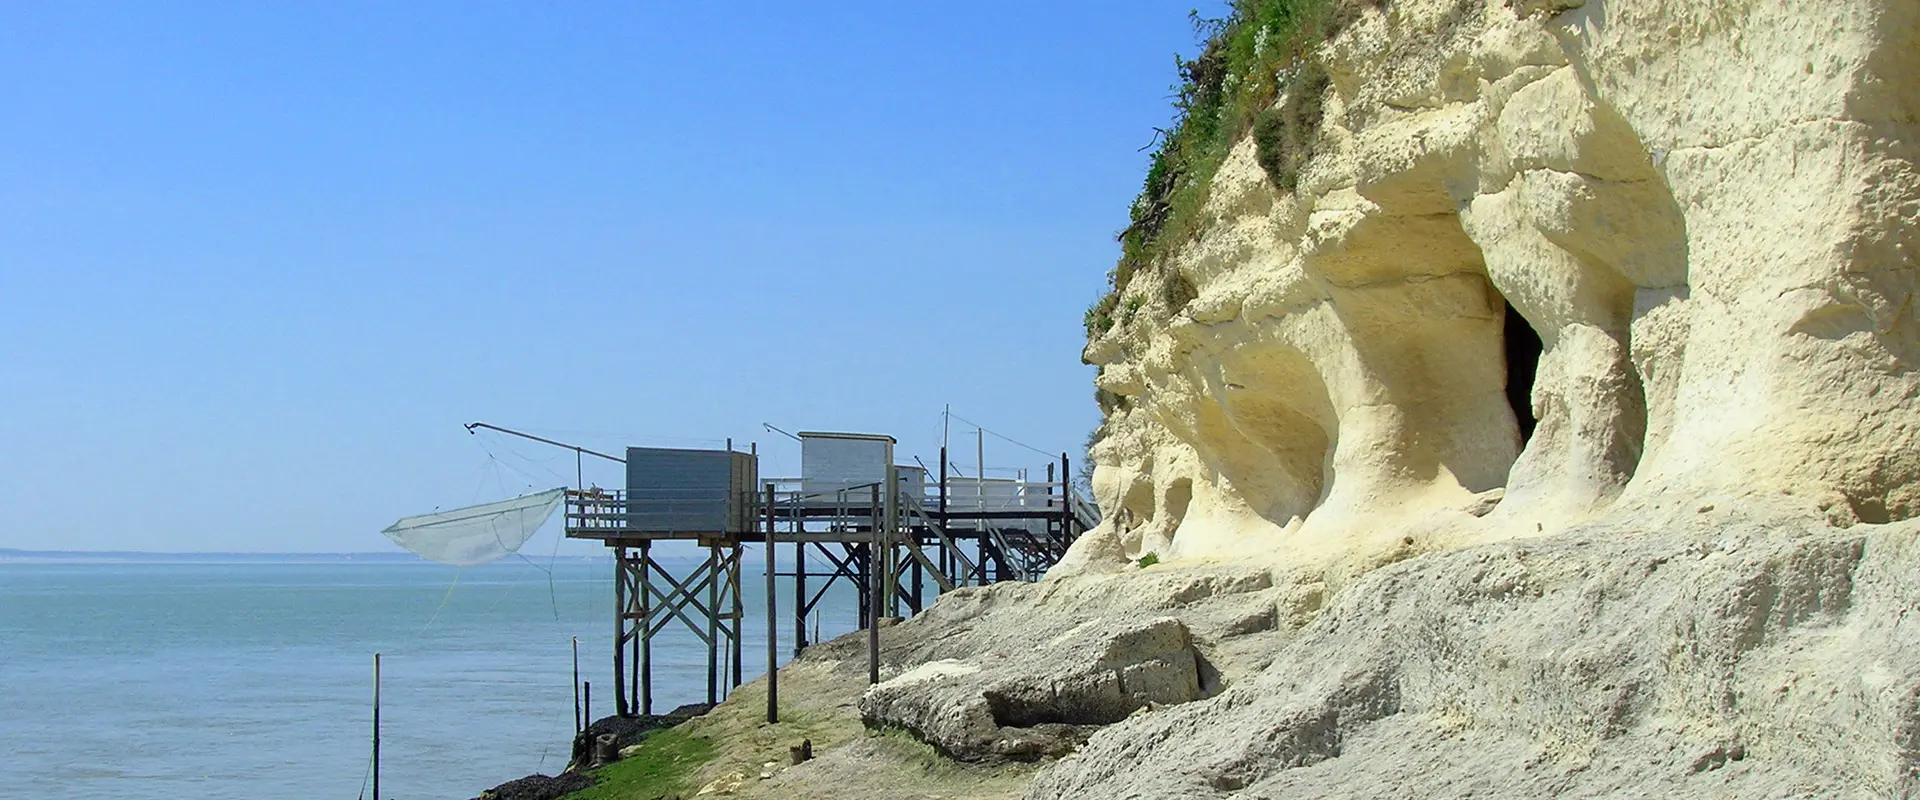 These cliff caves are karstic cavities from which Upper Cretaceous limestone was quarried in underground workings, Charente-Maritime